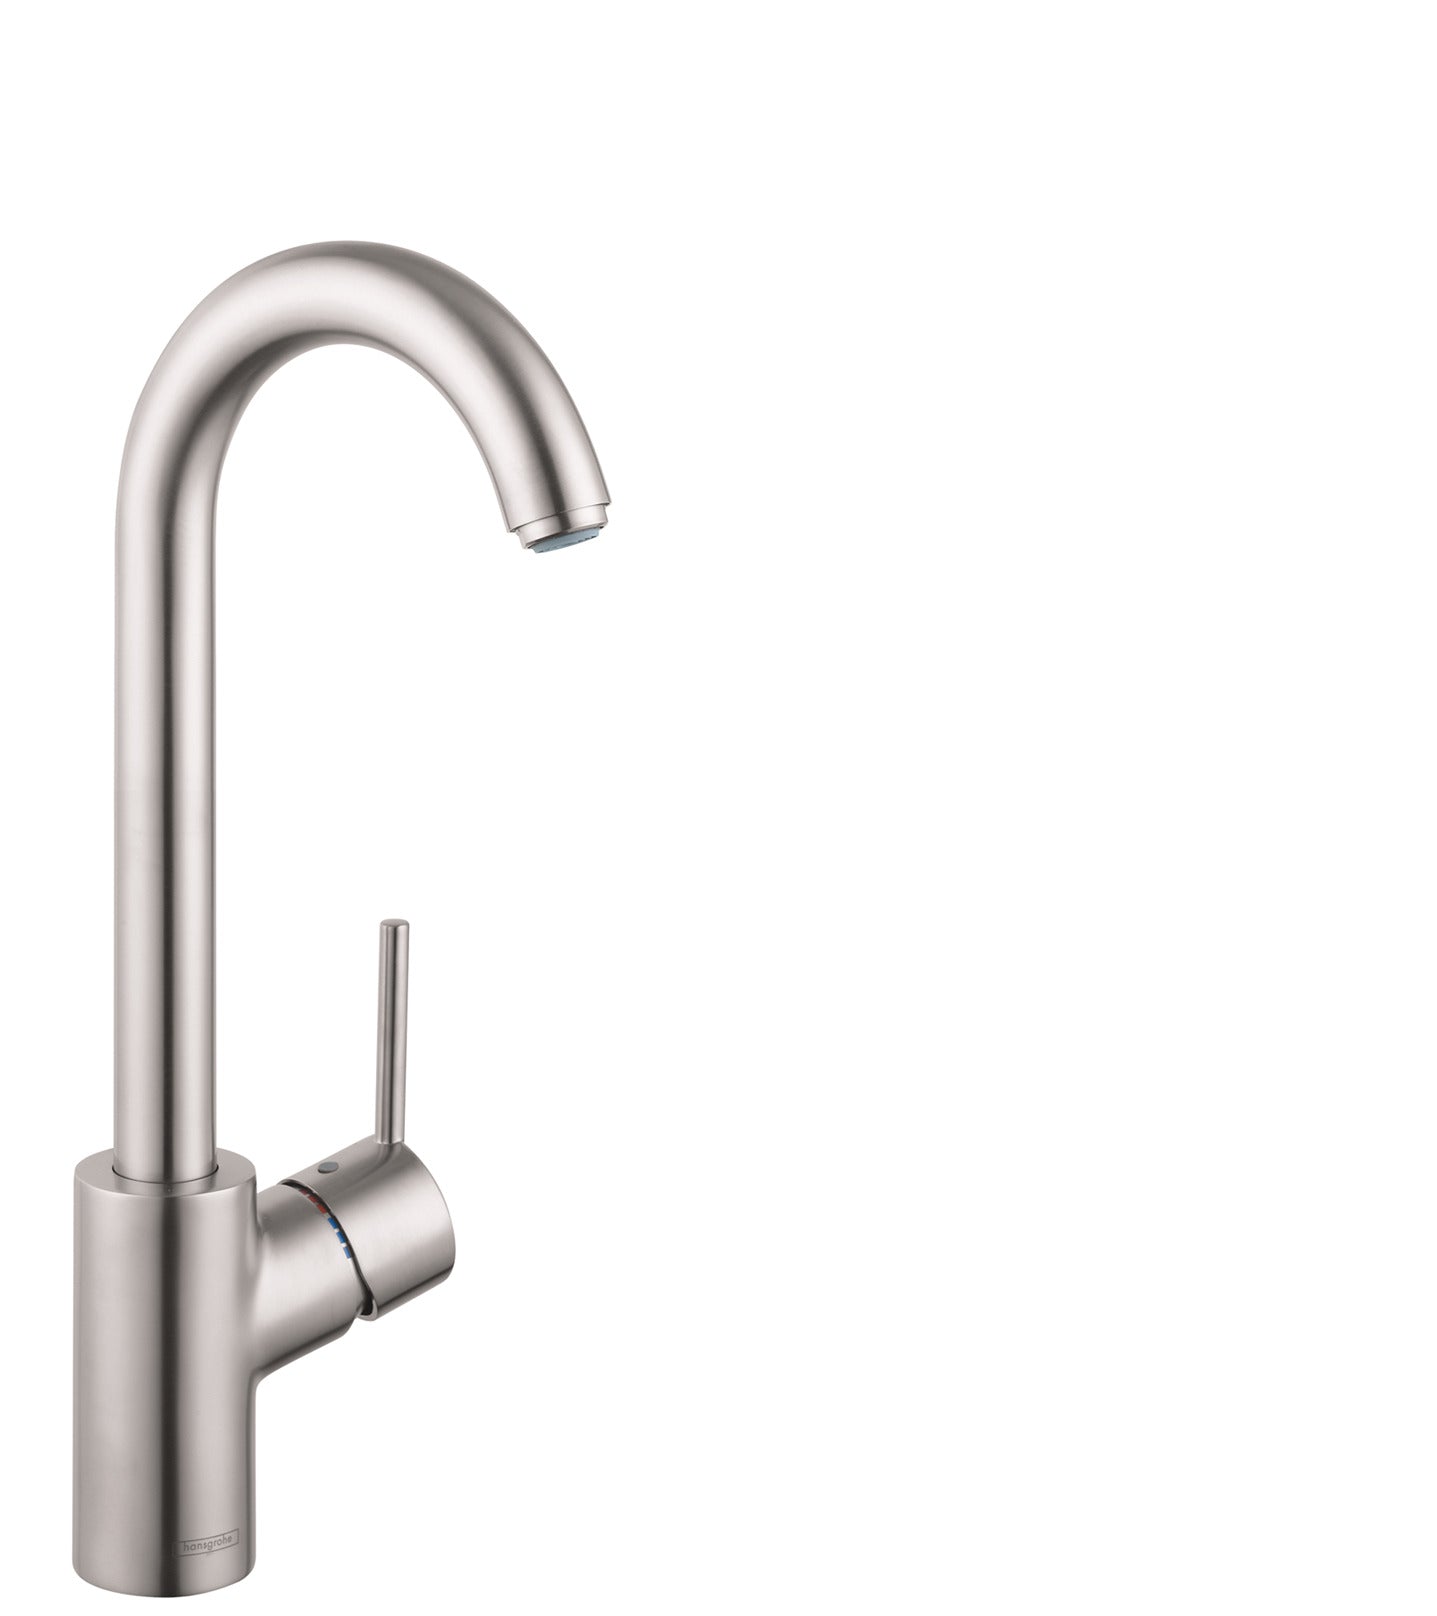 HANSGROHE 04287800 Stainless Steel Optic Talis S Modern Kitchen Faucet 1.5 GPM